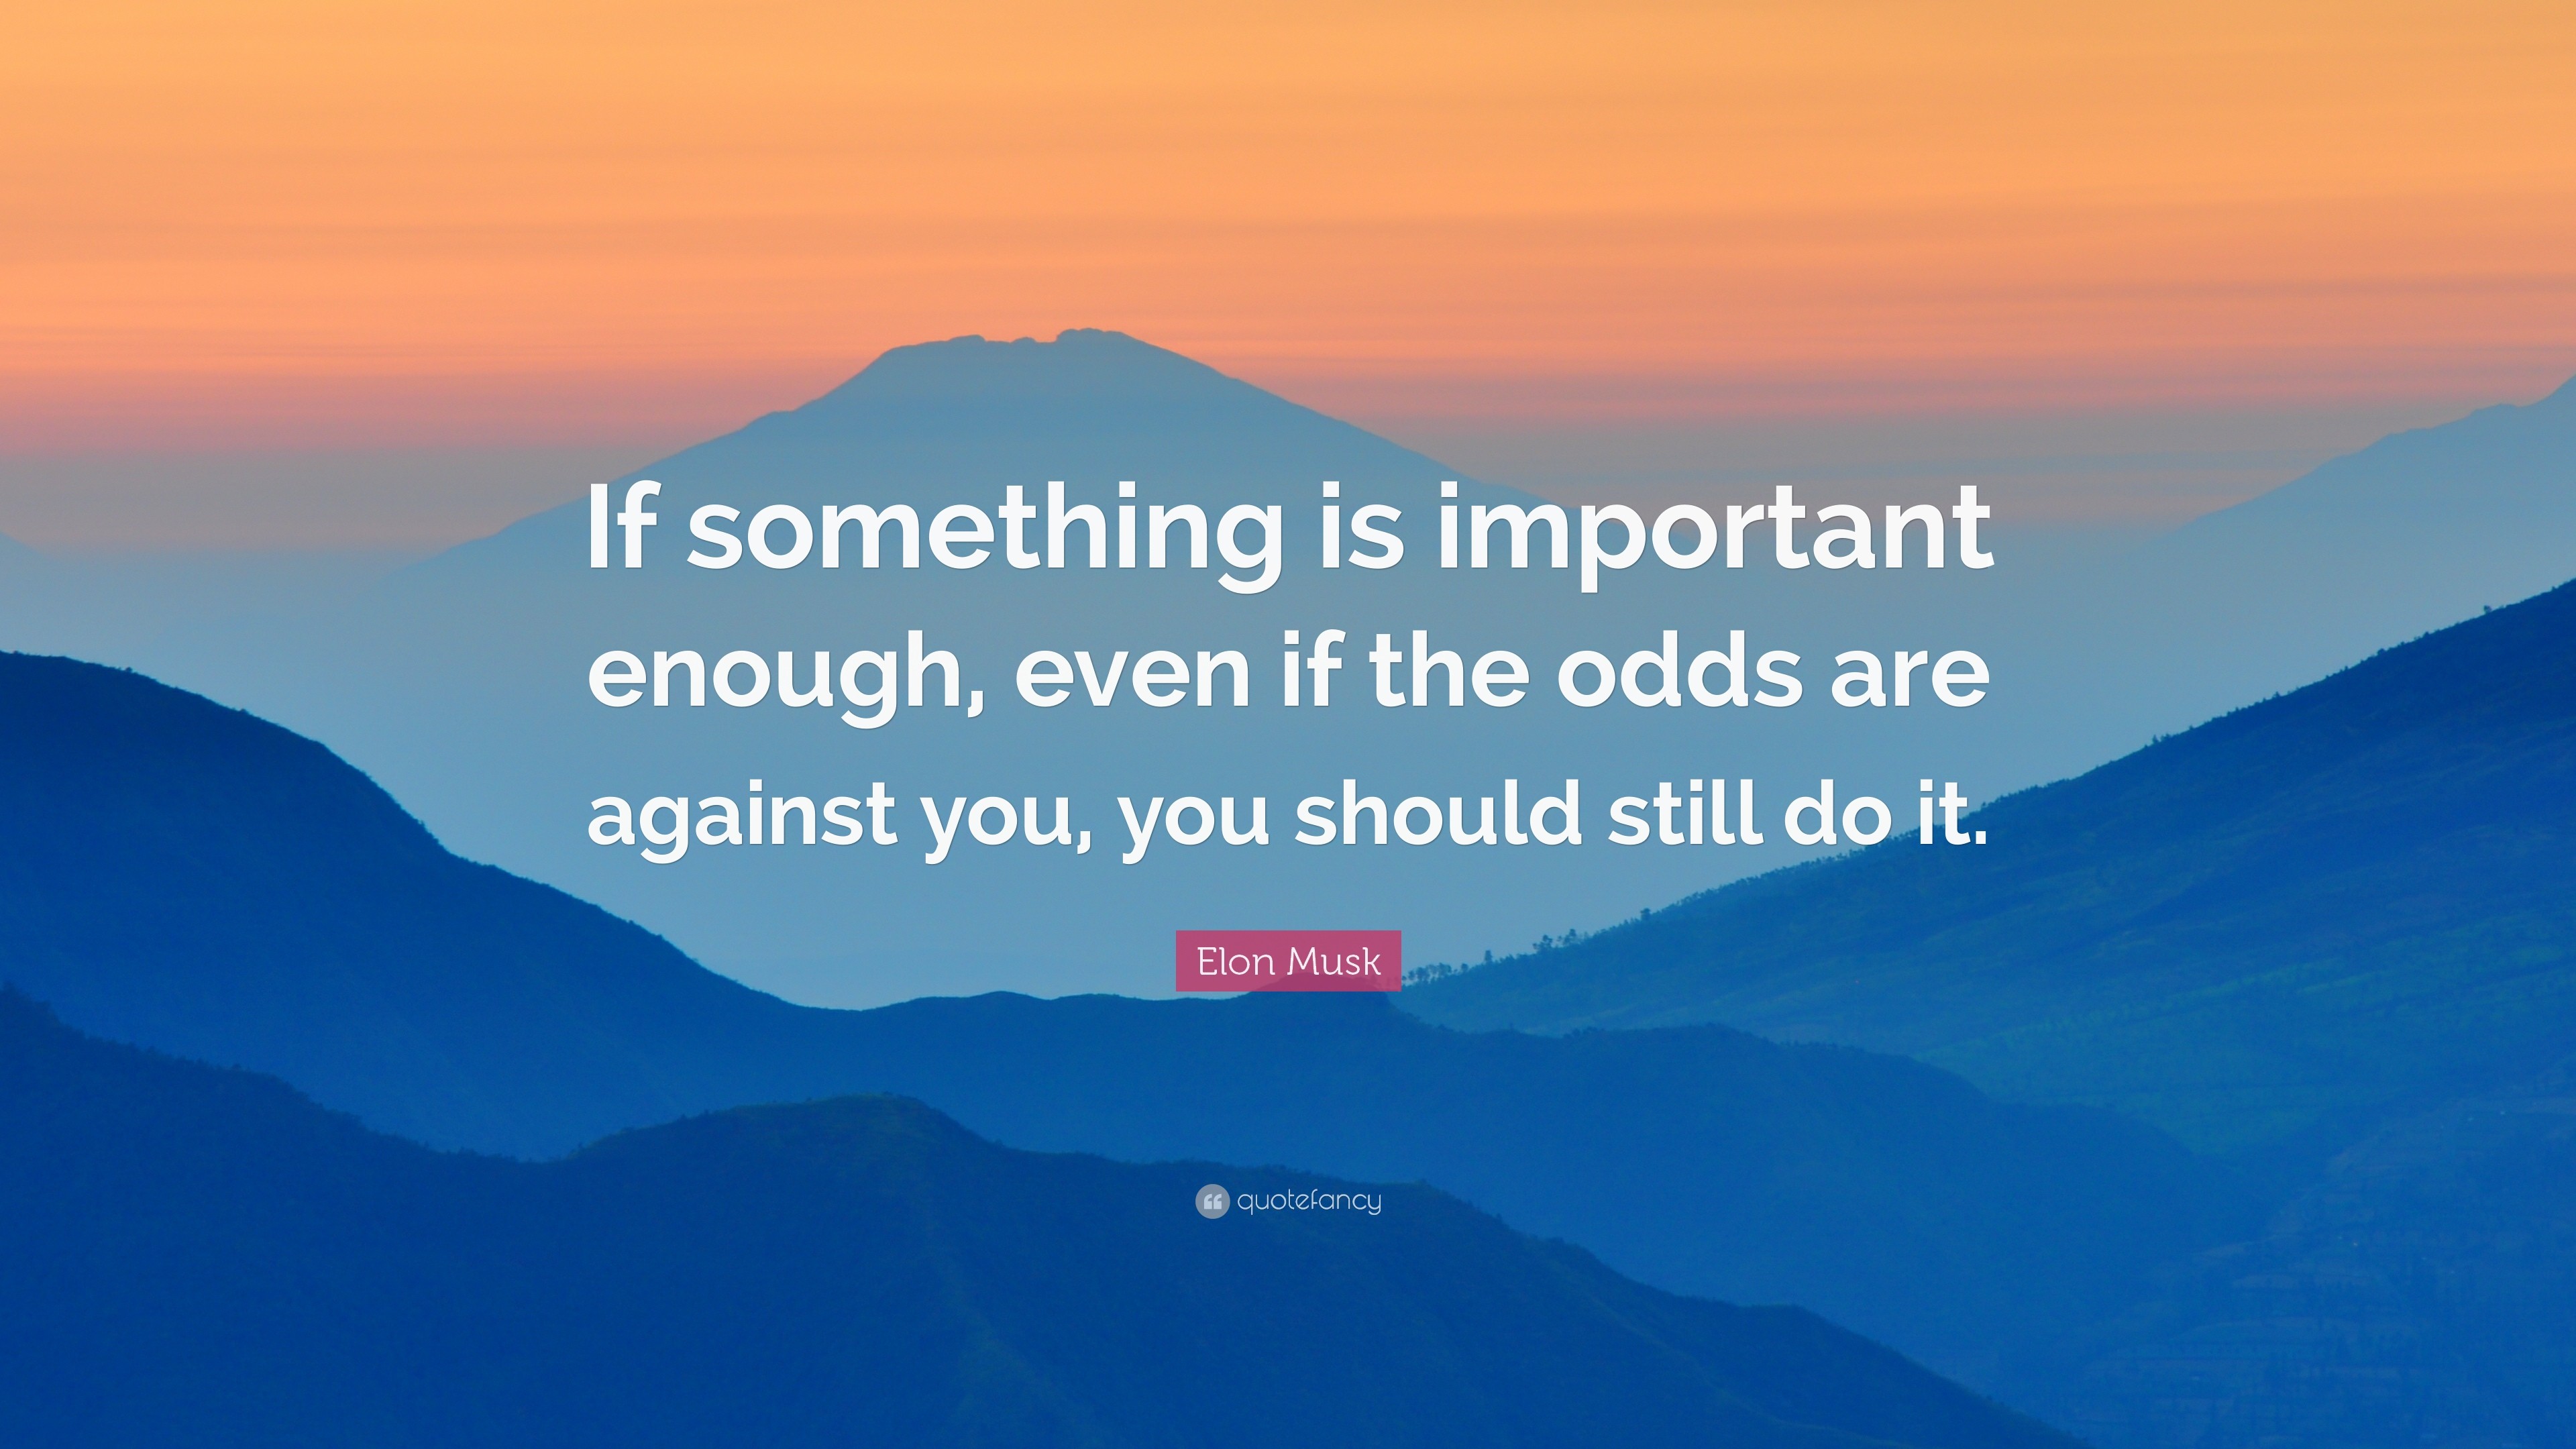 3840x2160 Elon Musk Quote: “If something is important enough, even if the odds are